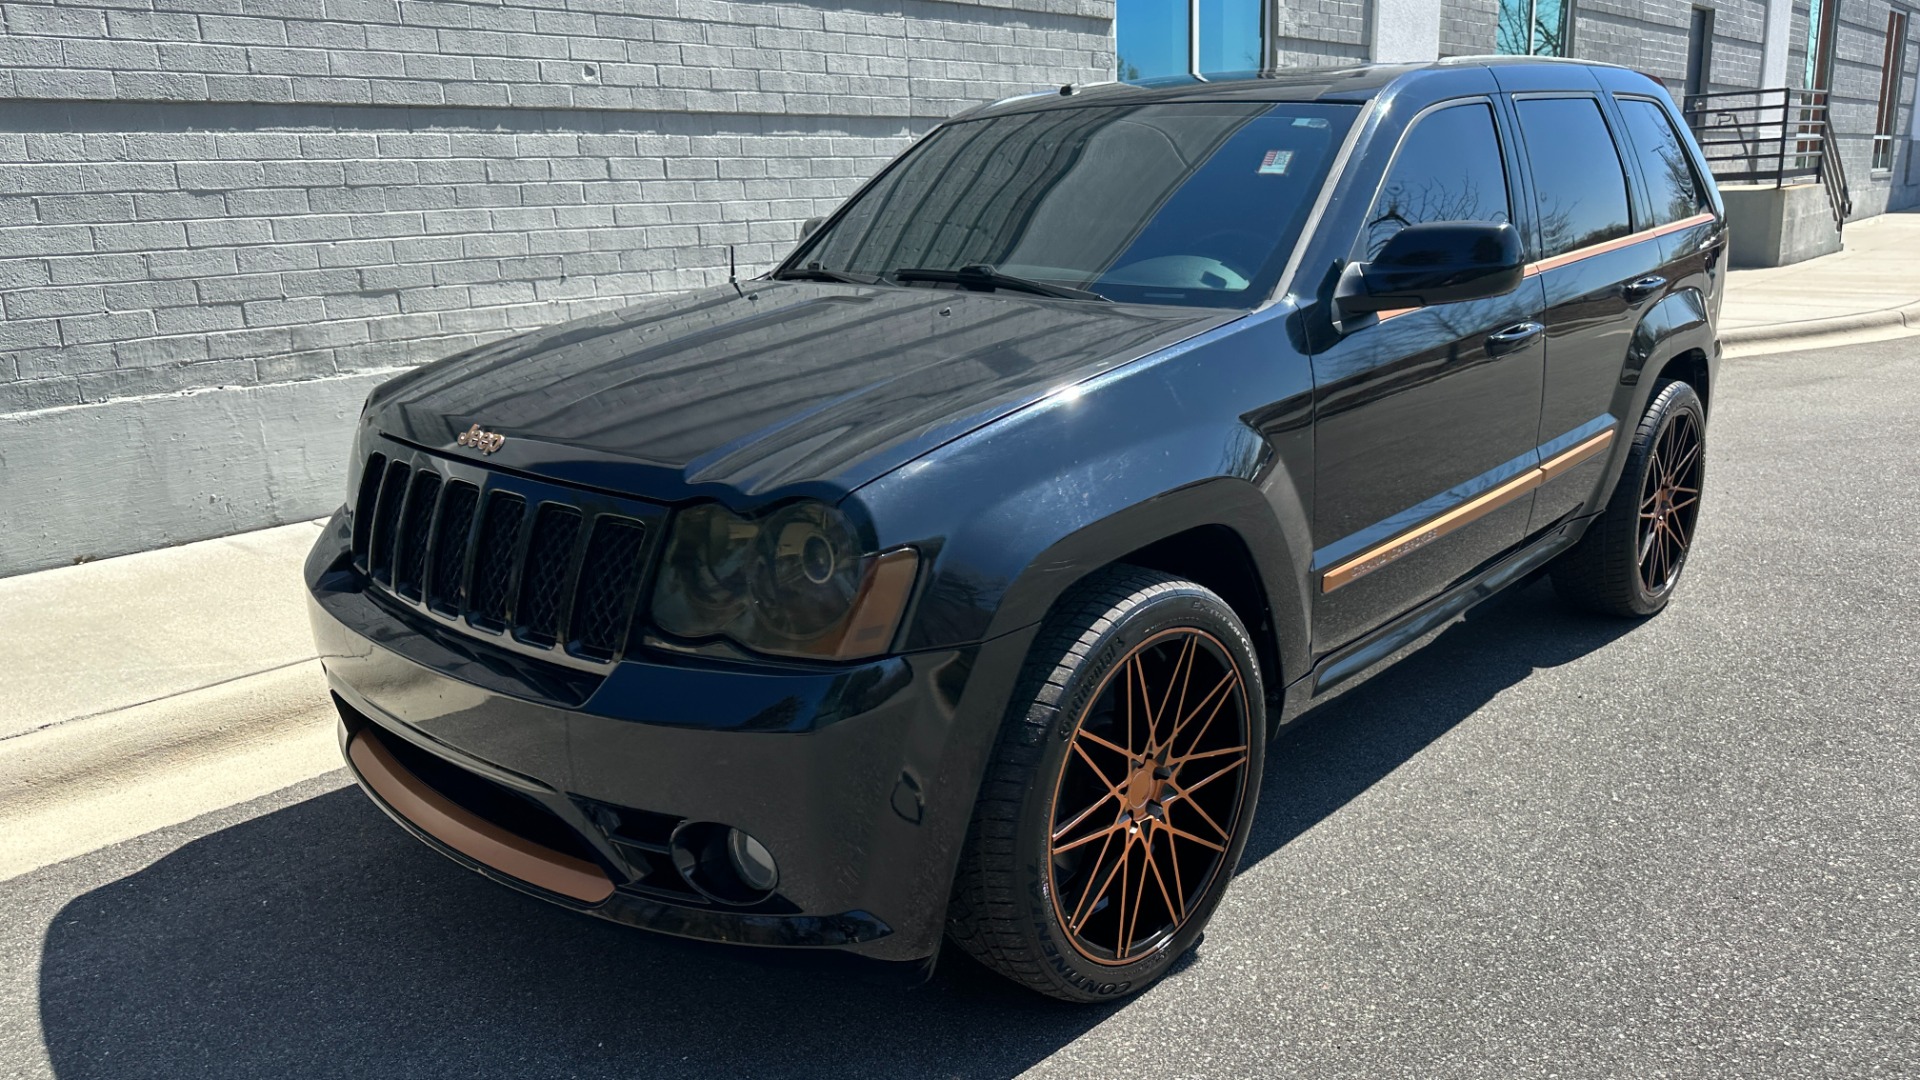 Used 2008 Jeep Grand Cherokee SRT-8 for sale Sold at Formula Imports in Charlotte NC 28227 2